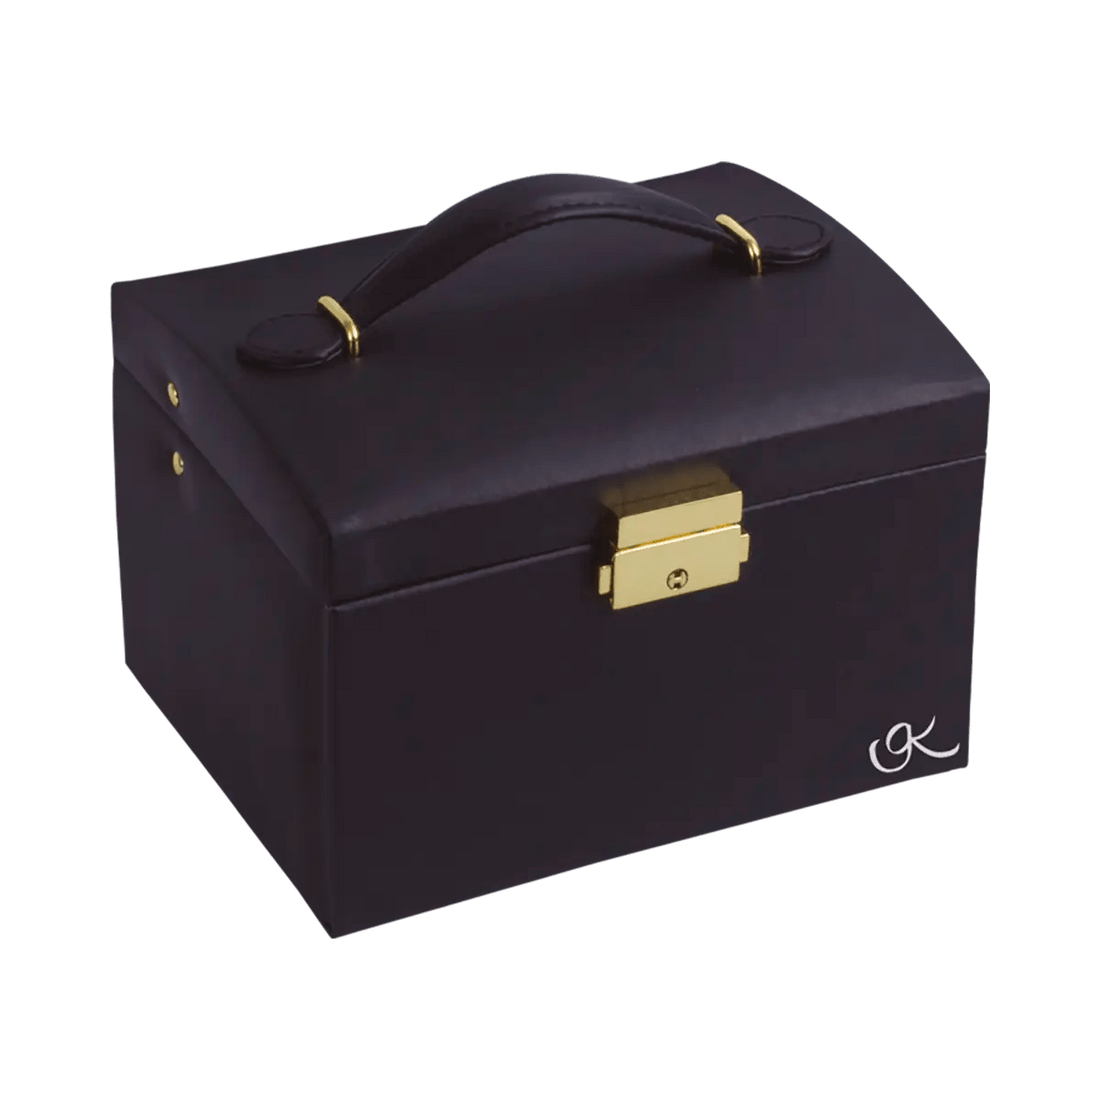 Large Leather Print Laptop Case With StrapMedium black vinyl print with beige interior jewelry box for women. Shop in San Diego, CA.